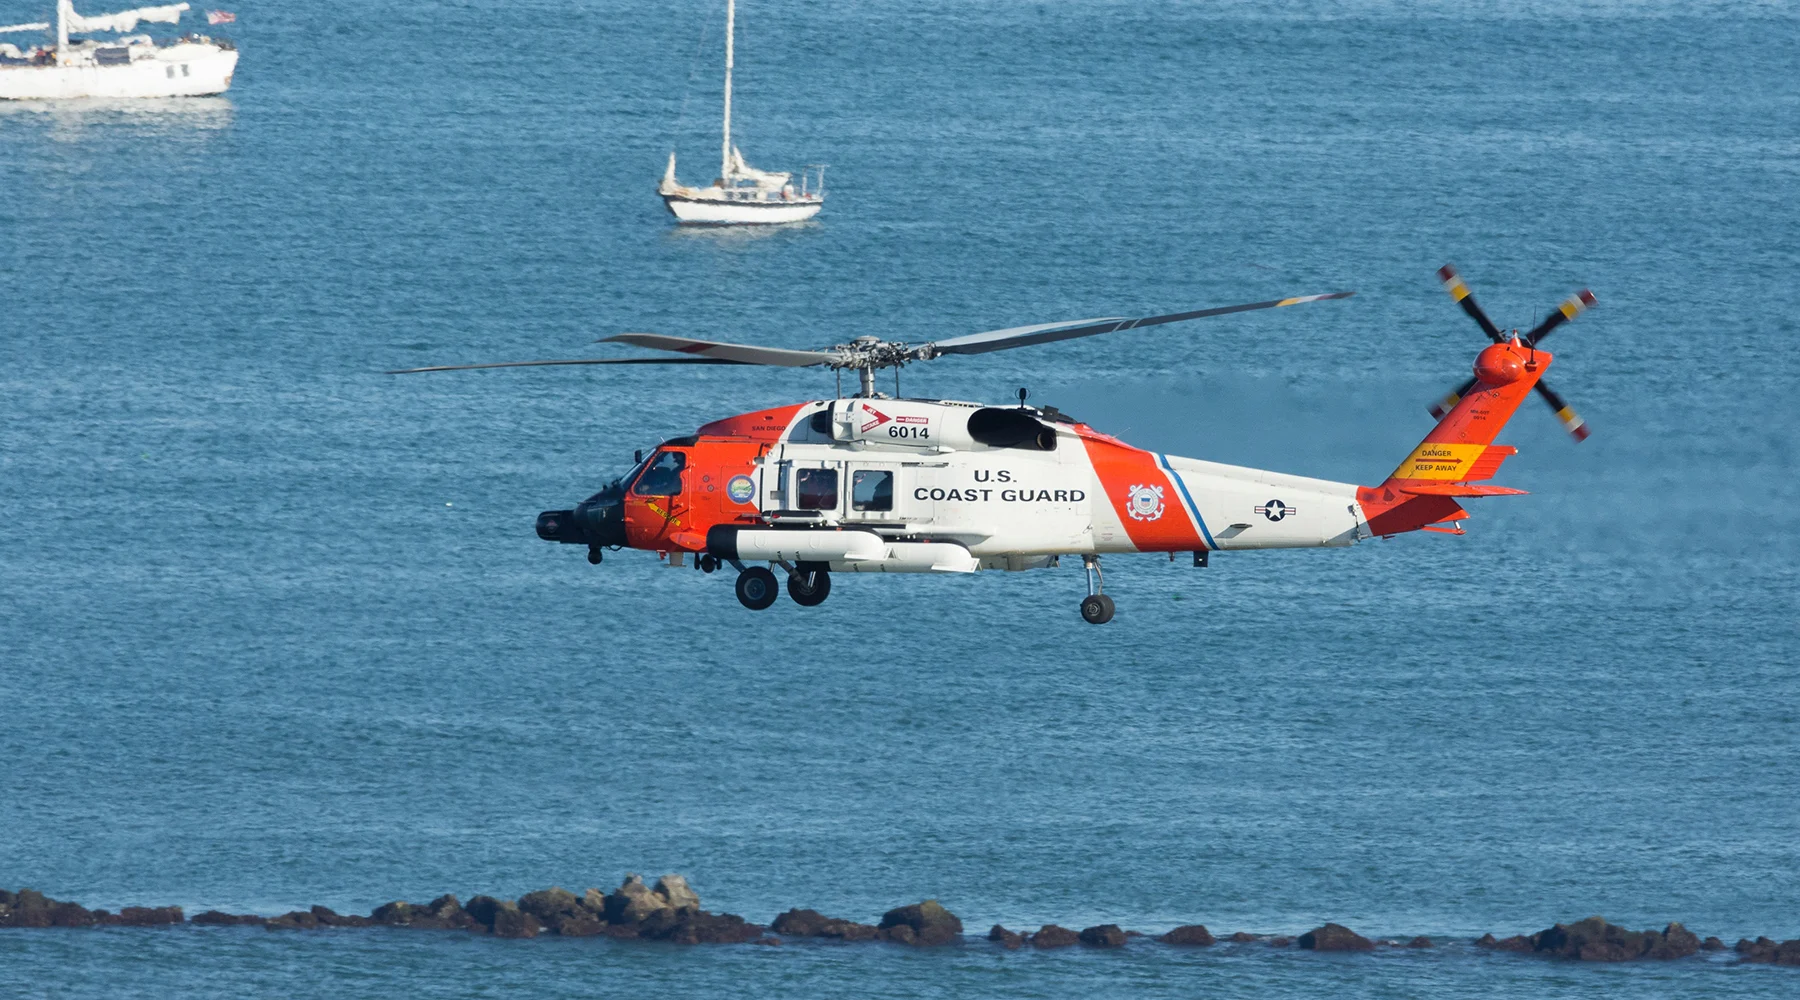 What the U.S. Coast Guard Learned about Trust, Education &#038; Community, Powered by WHOOP